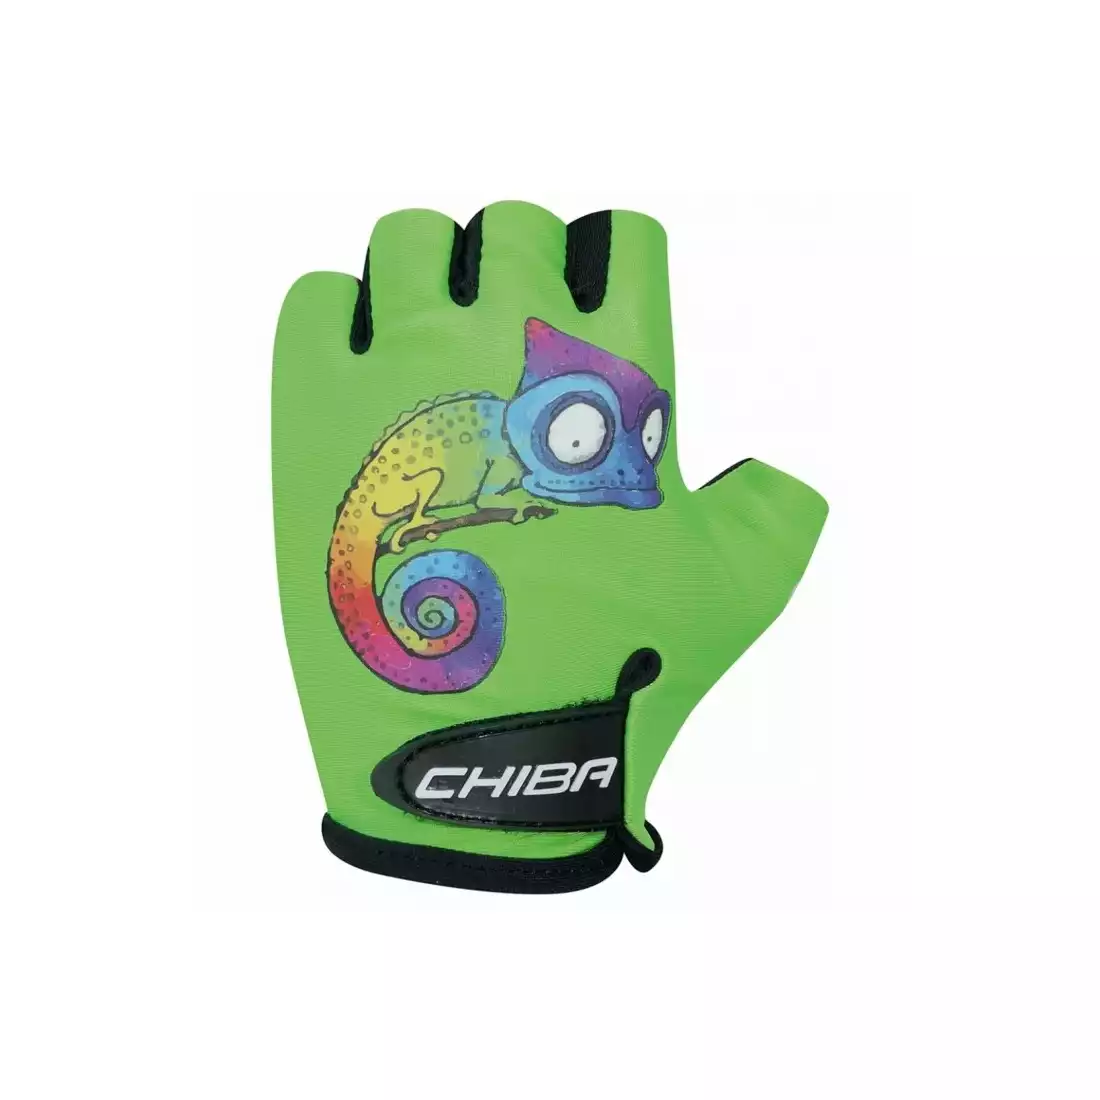 CHIBA children's cycling gloves COOL KIDS black and green 3050518ZK-2